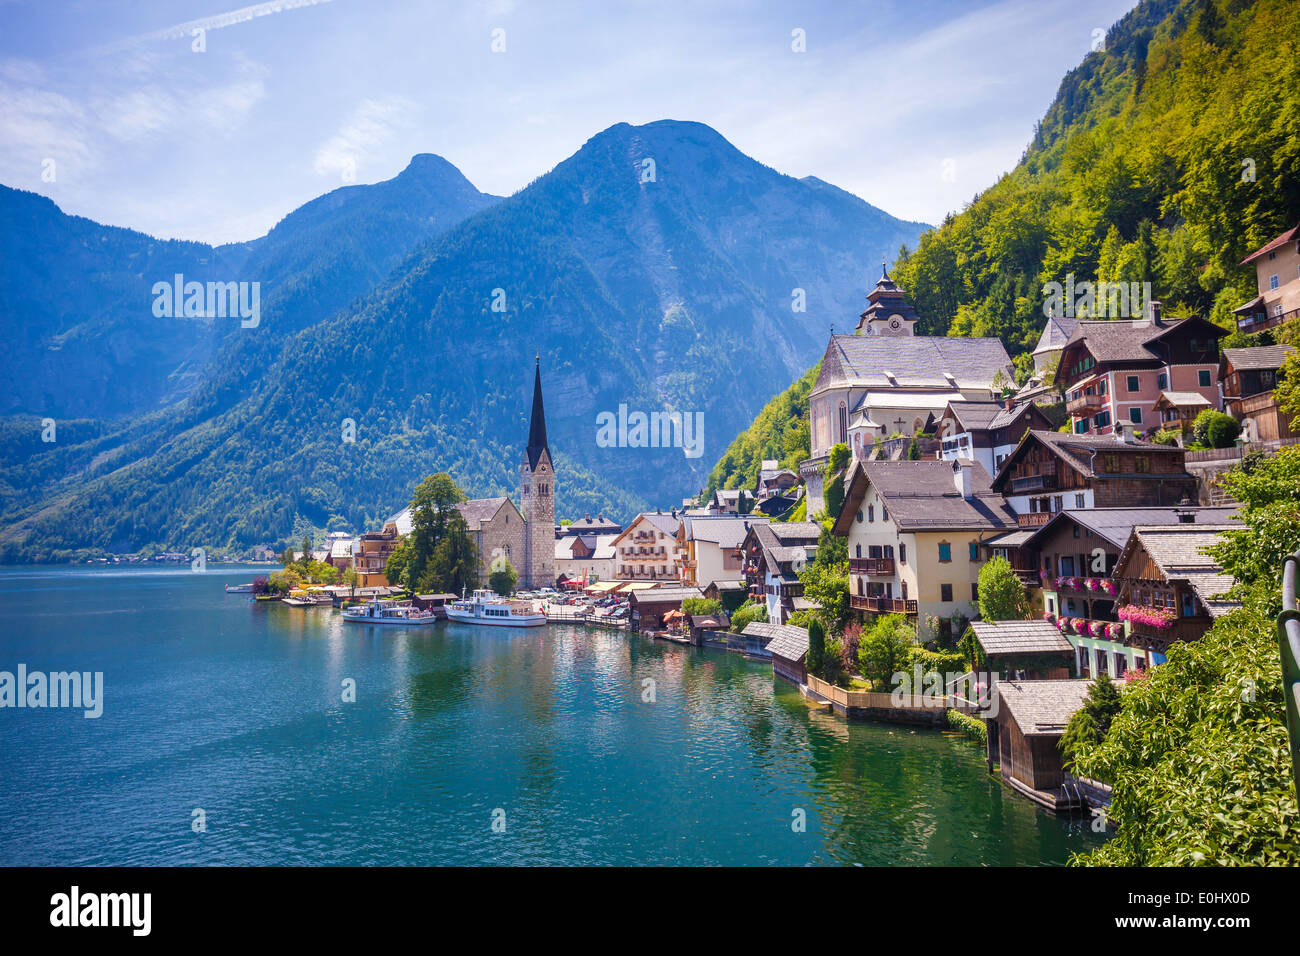 View of Hallstatt village with lake and Alps behind, Austria Stock Photo